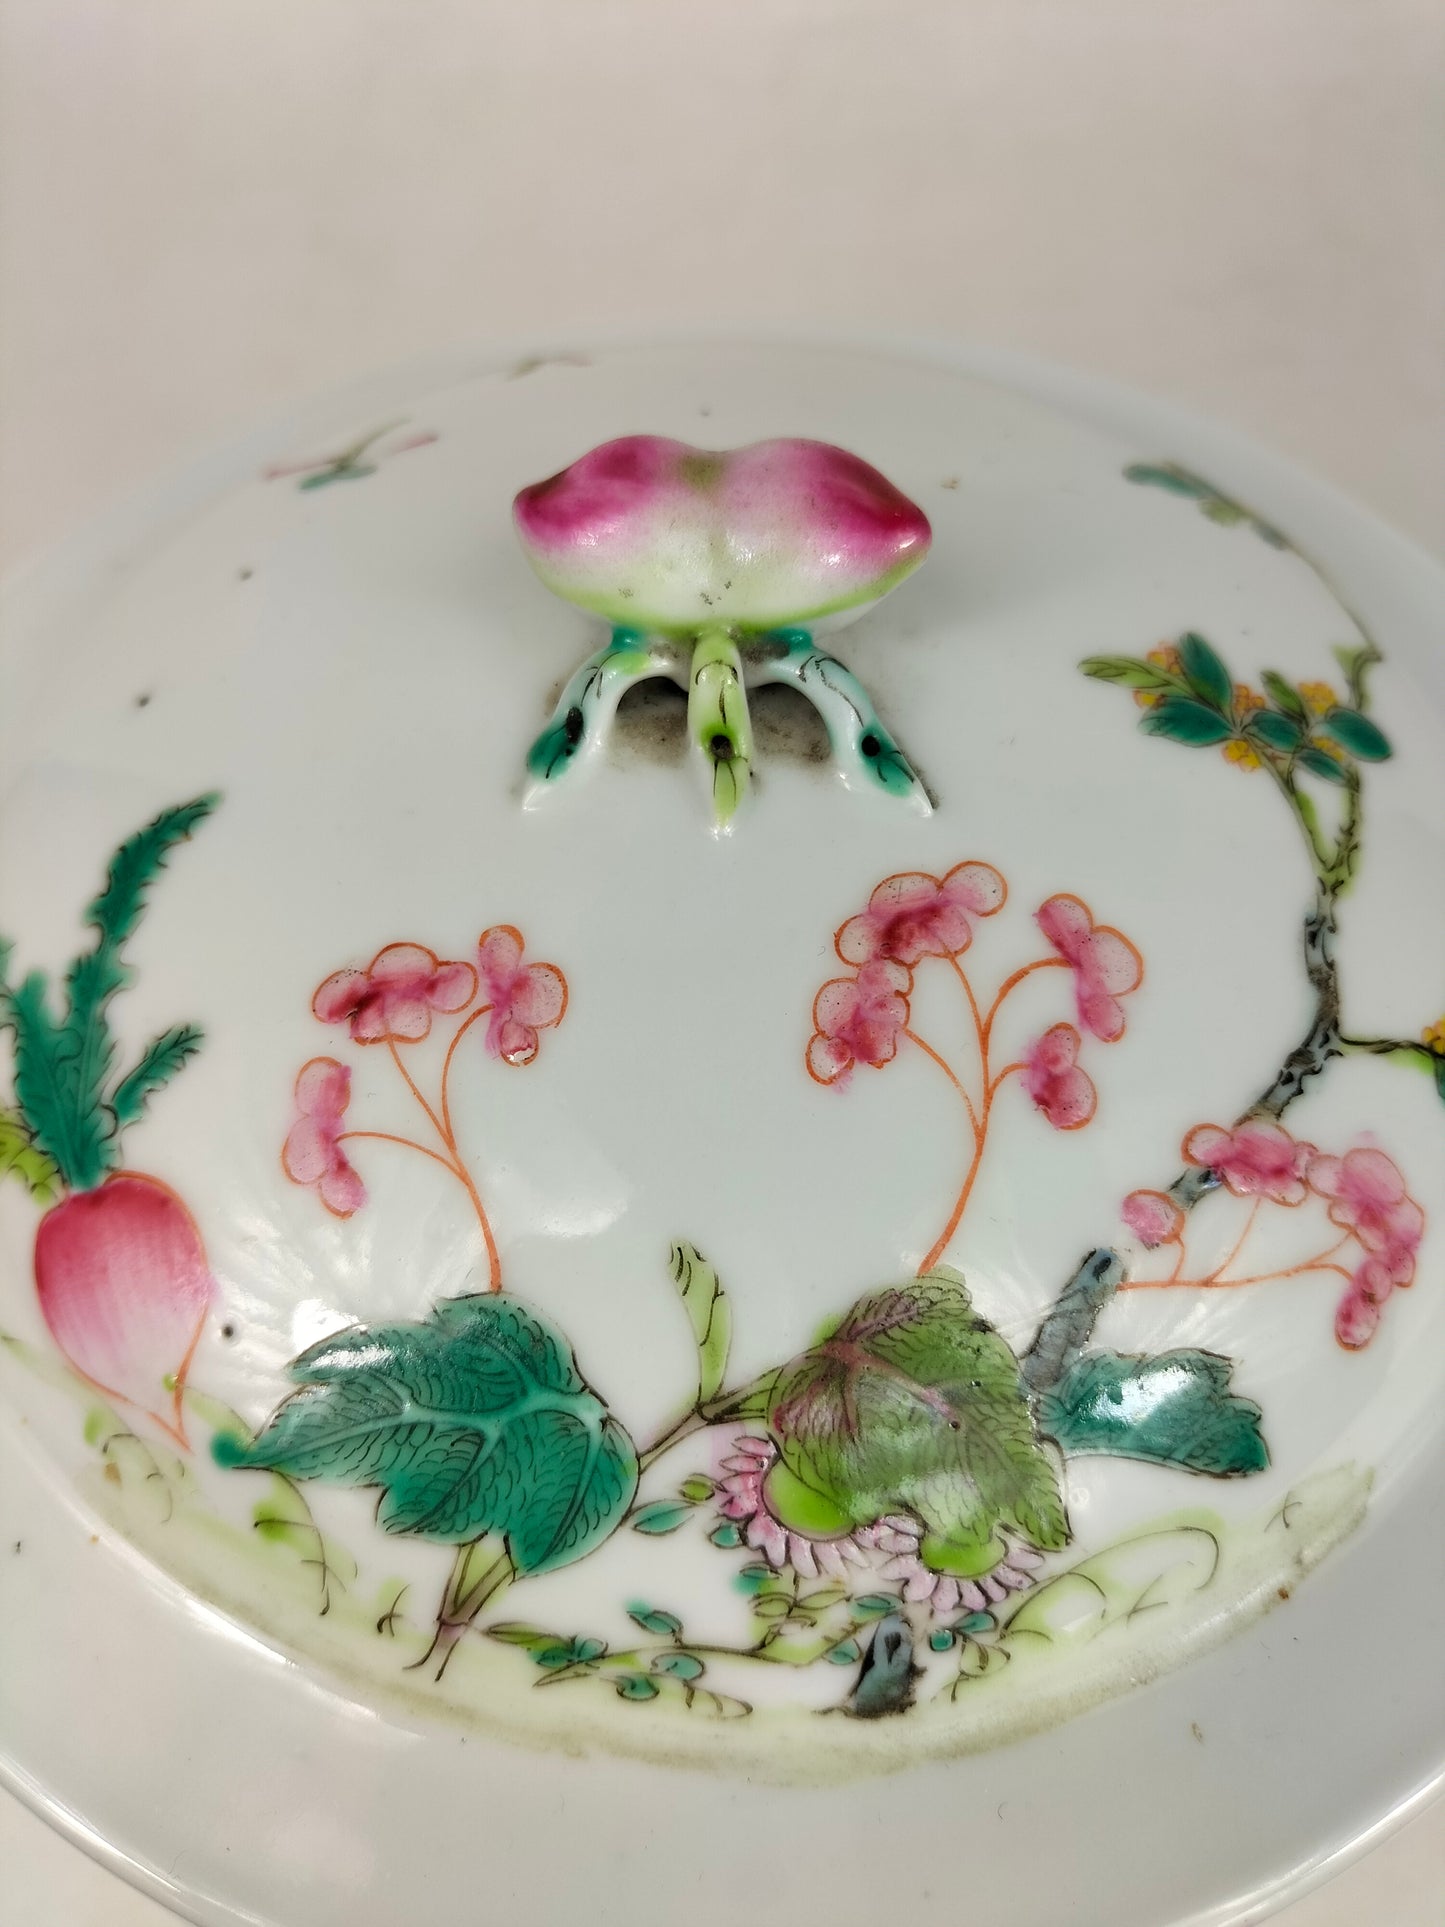 Antique Chinese famille rose lidded jar decorated with flowers and bats // Republic Period (1912-1949)